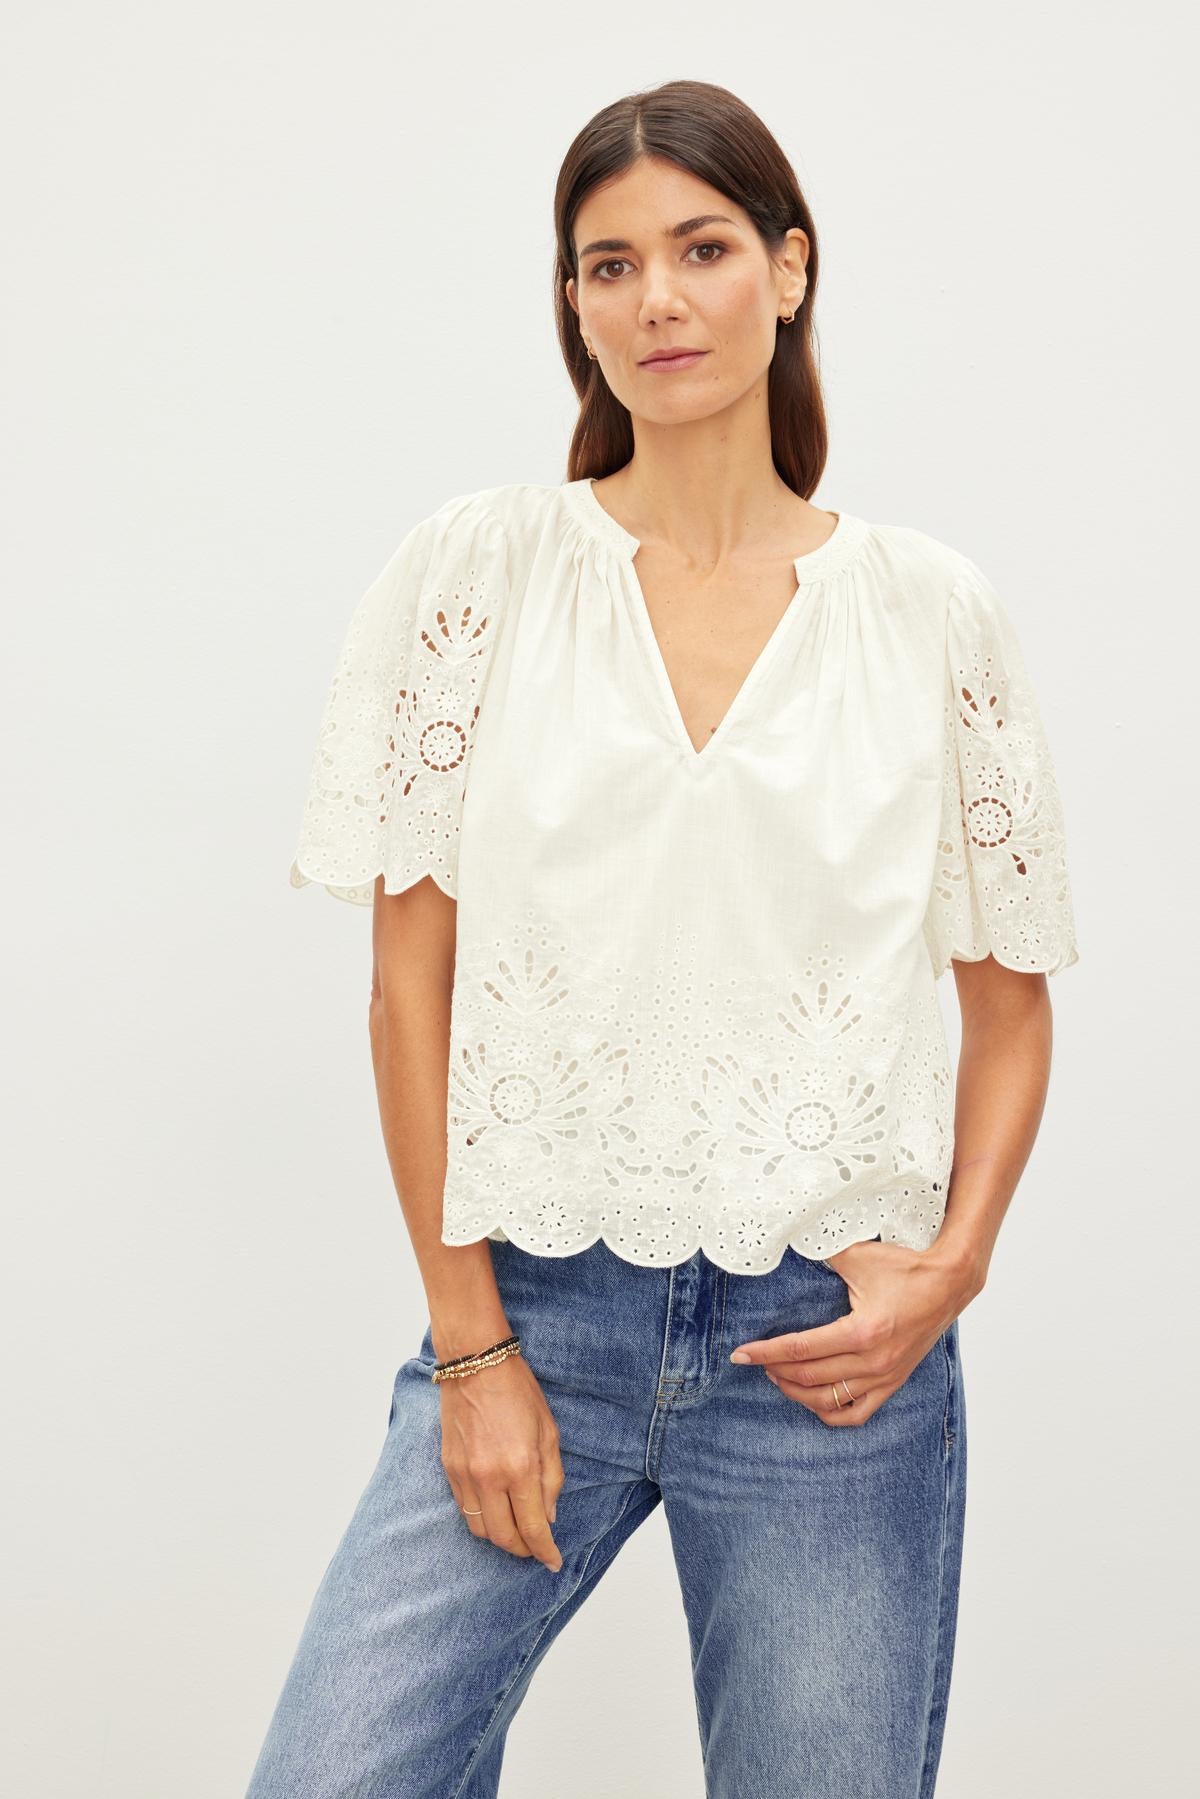 A woman in a white RAZI EMBROIDERED COTTON LACE TOP with scallop cuffs and hem, and blue jeans standing against a plain background by Velvet by Graham & Spencer.-36454010552513